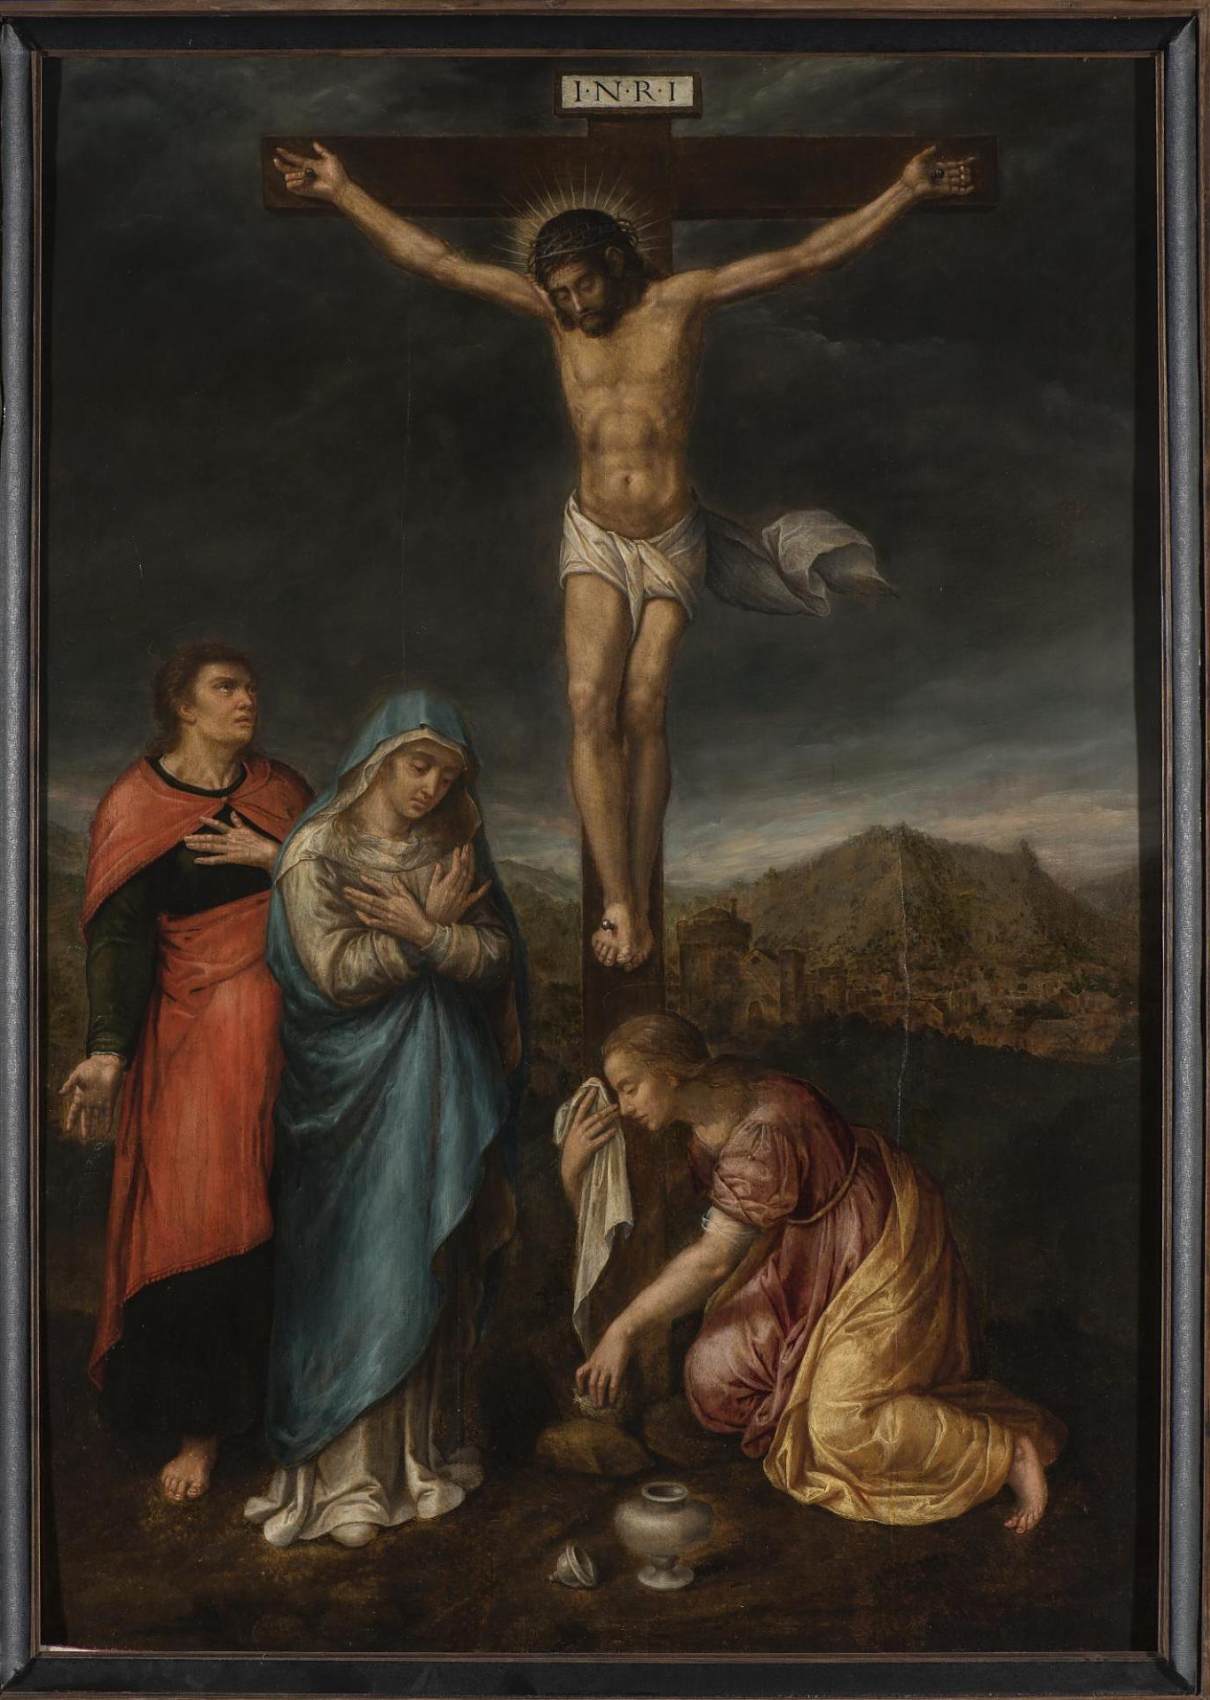 The Crucifixion with The Virgin Mary, Saint John the Evangelist and Mary Magdalene